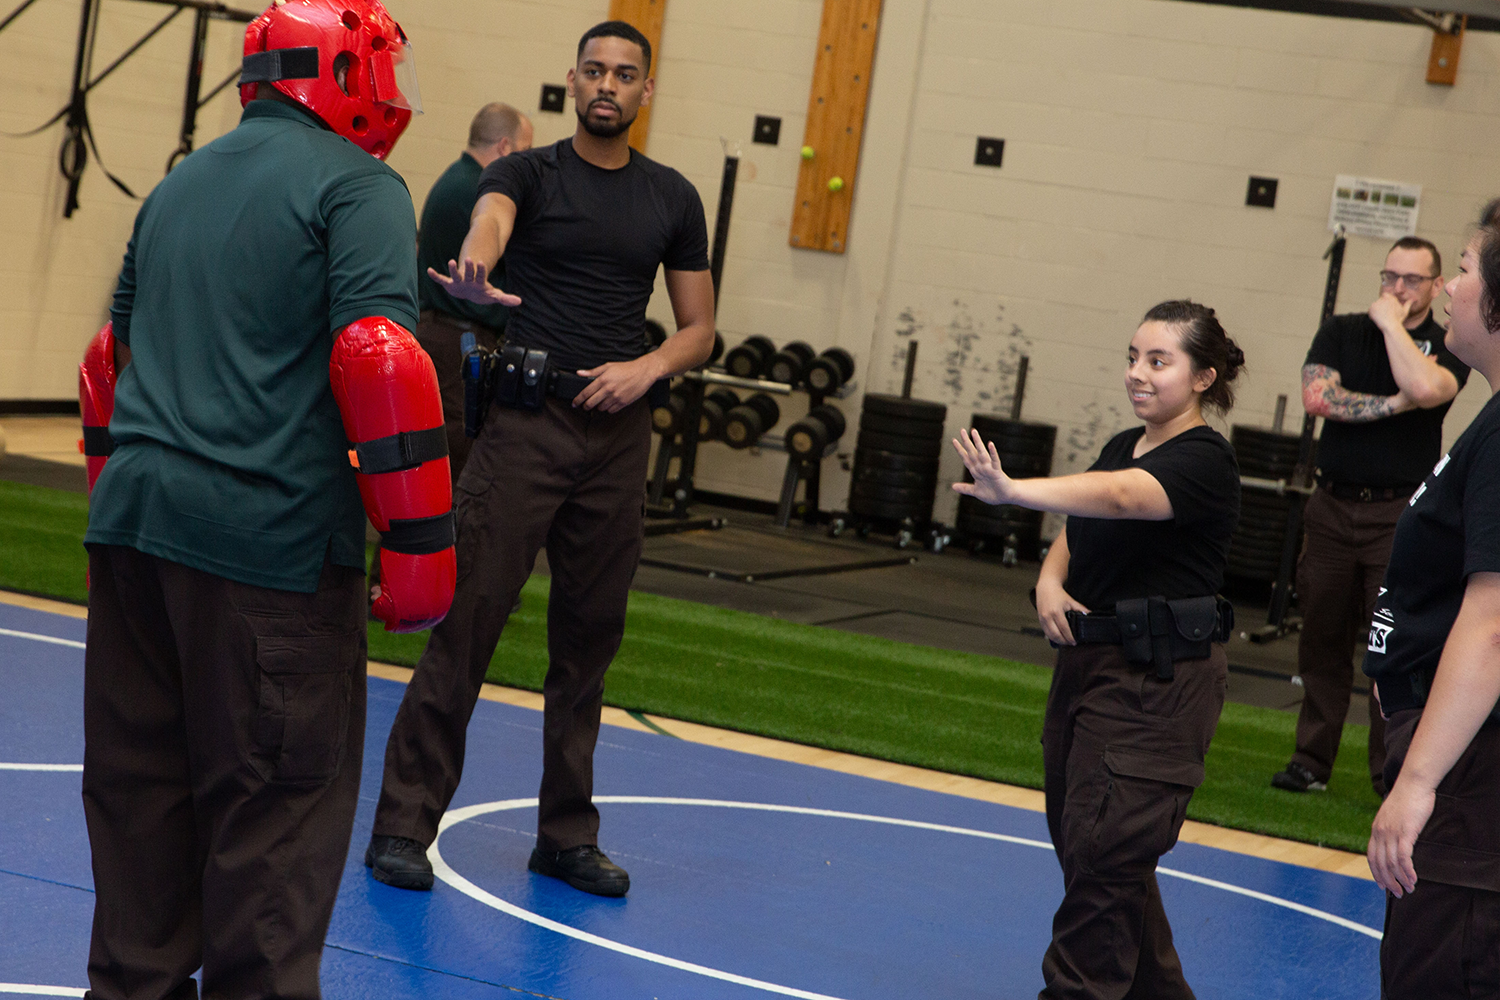 Melani Monje Riberth (with arm outstretched) participates in a scenario drill at the Basic Summer Jailors Academy.